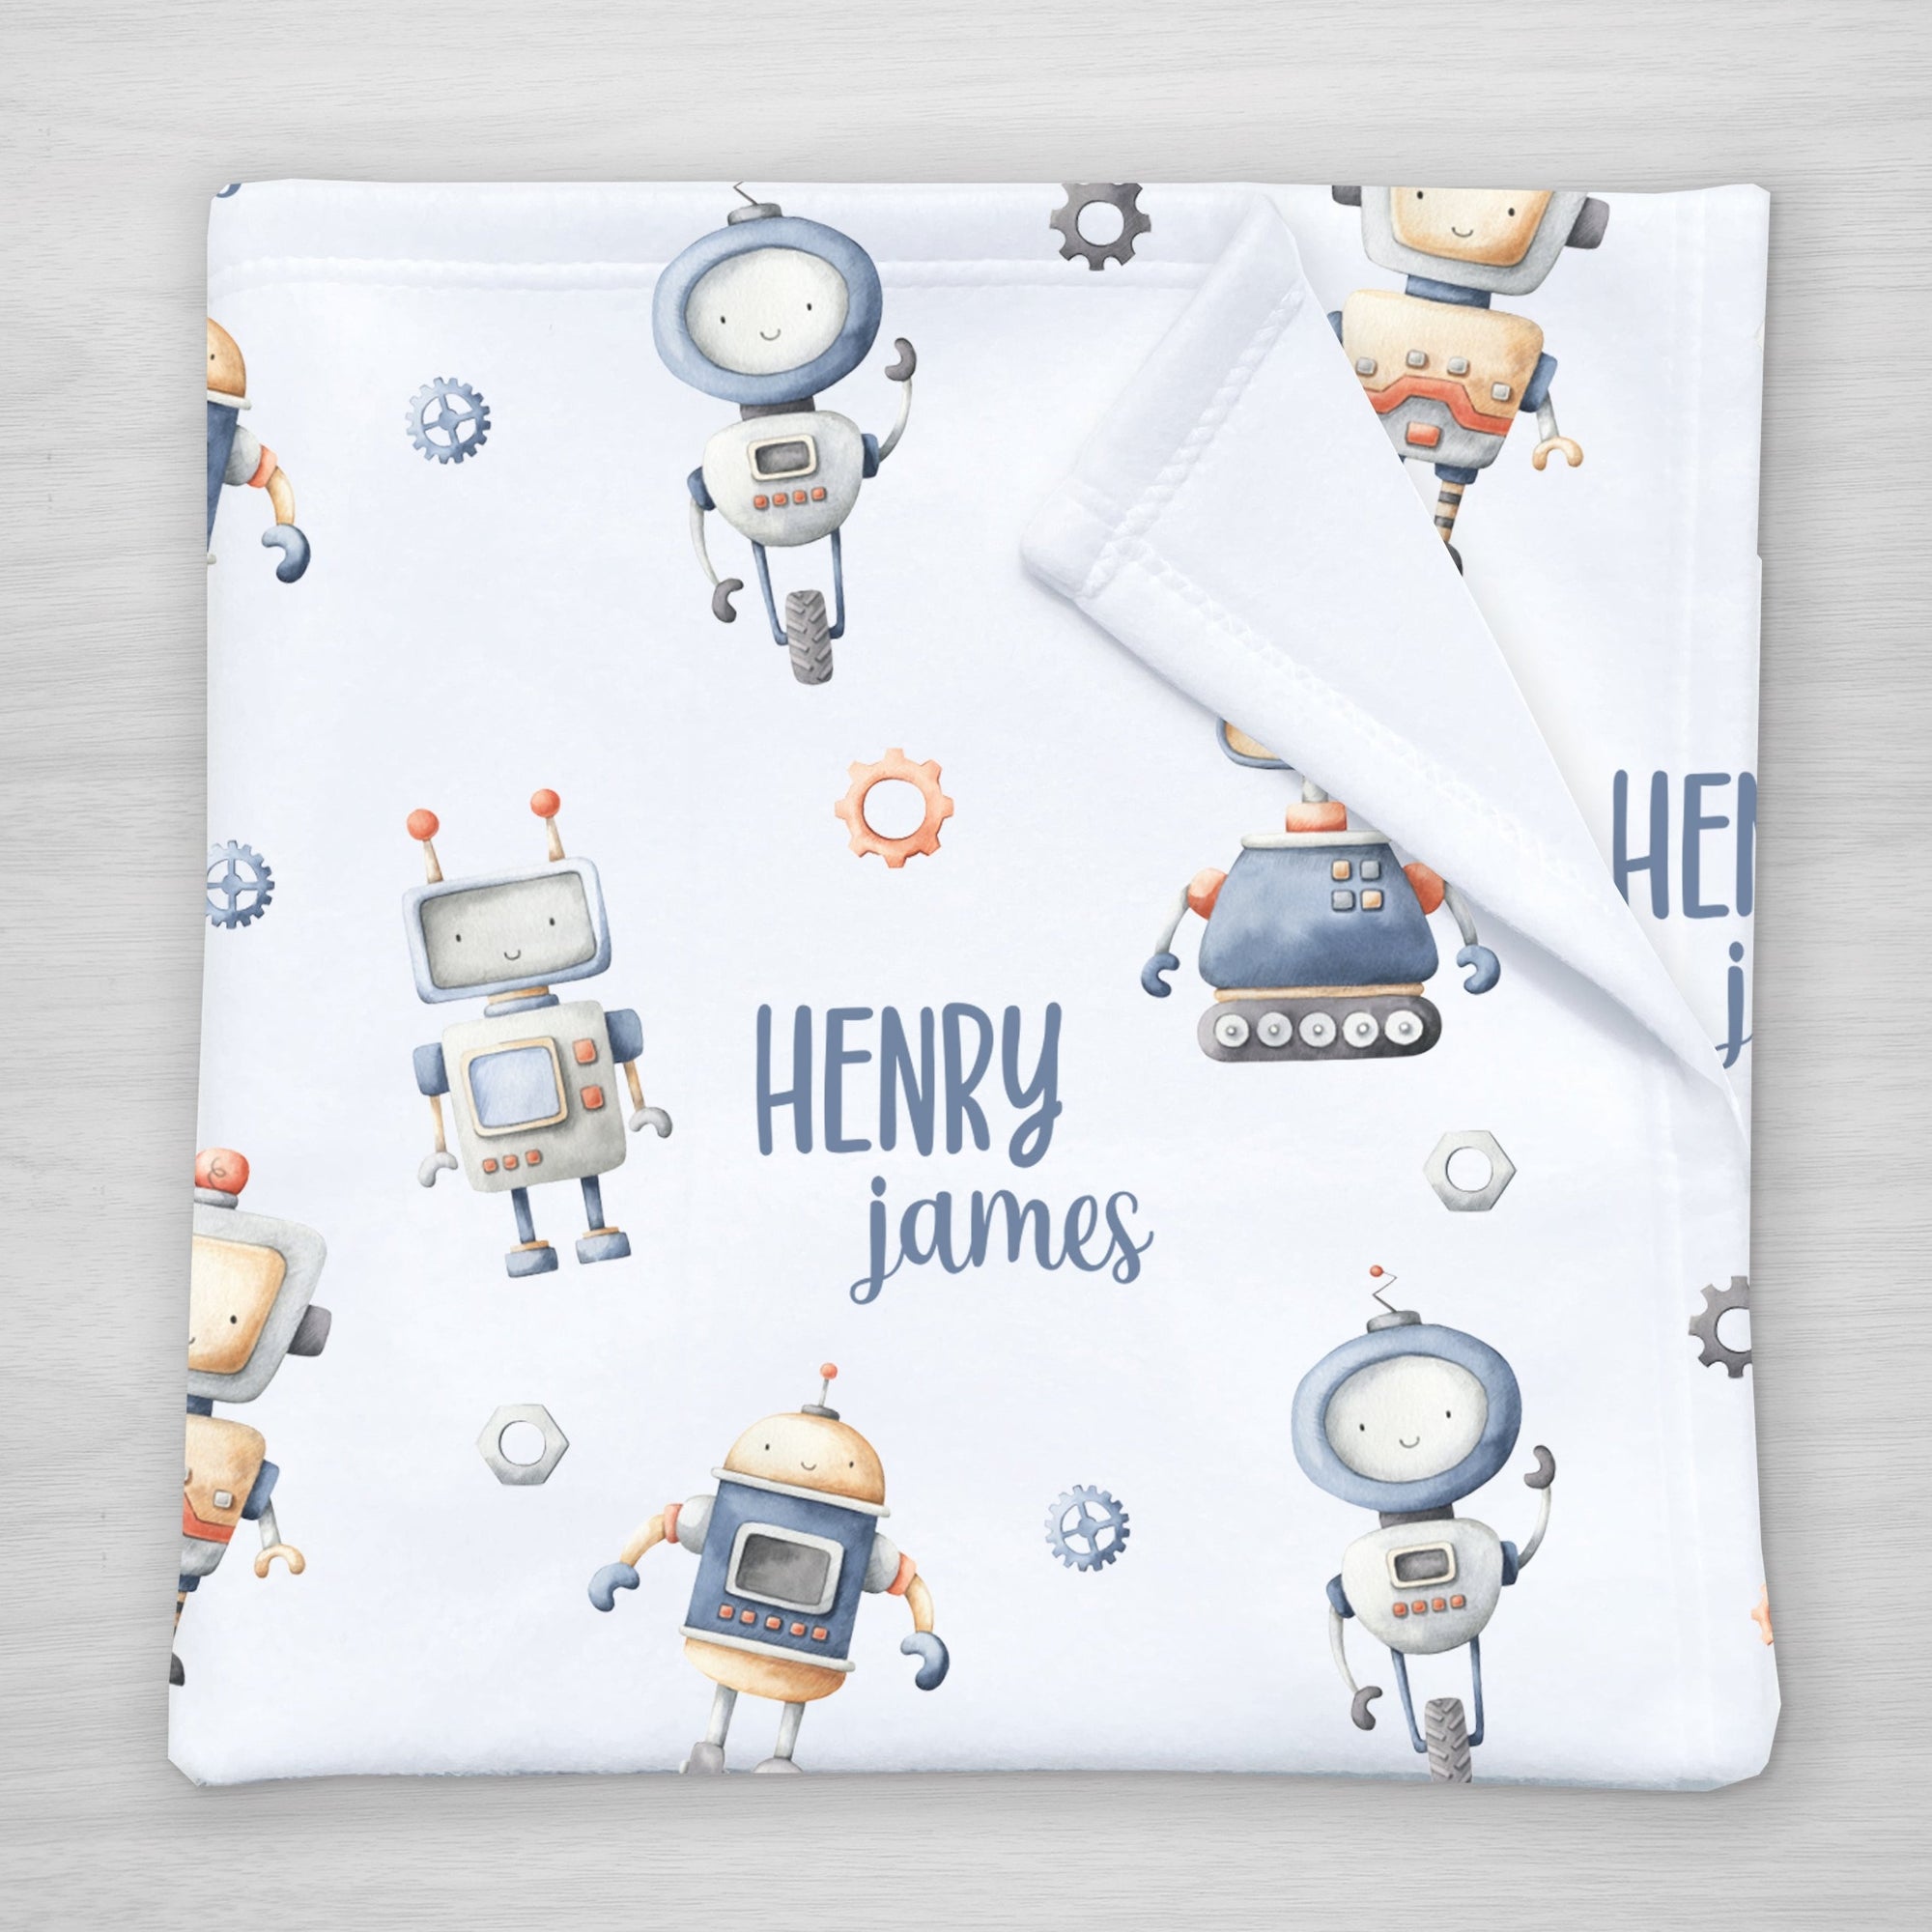 Personalized Robot Blanket for kids, toddlers, or babies. Super soft fleece